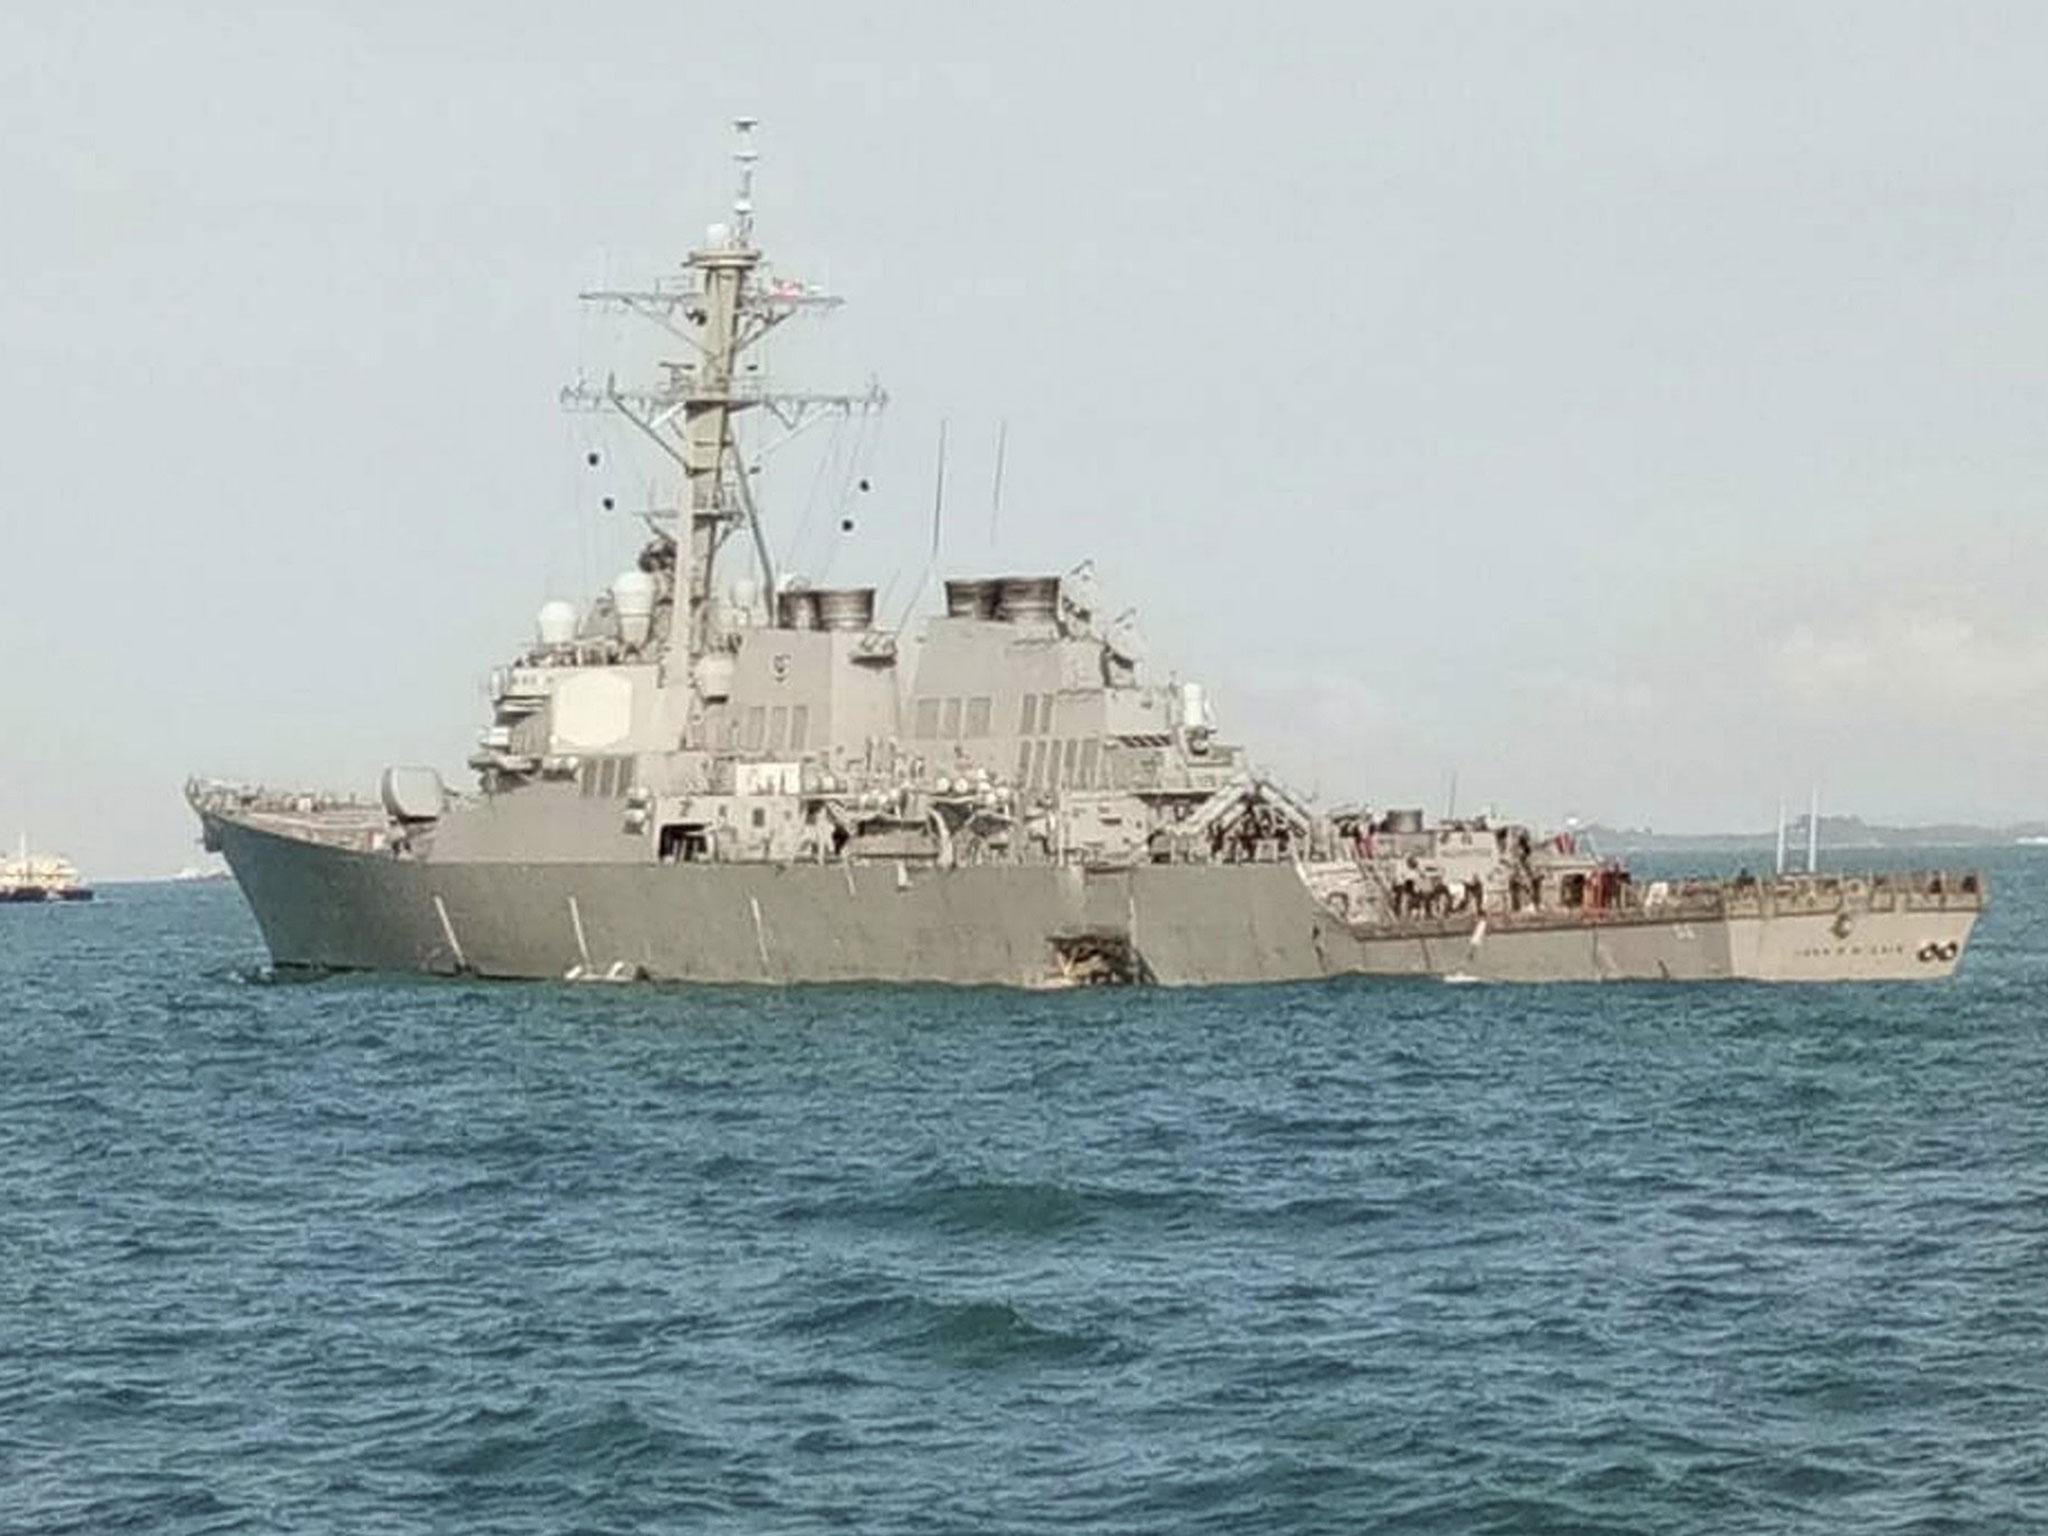 The US guided-missile destroyer USS John S McCain collided with an oil tanker off the coast of Johor, Malaysia